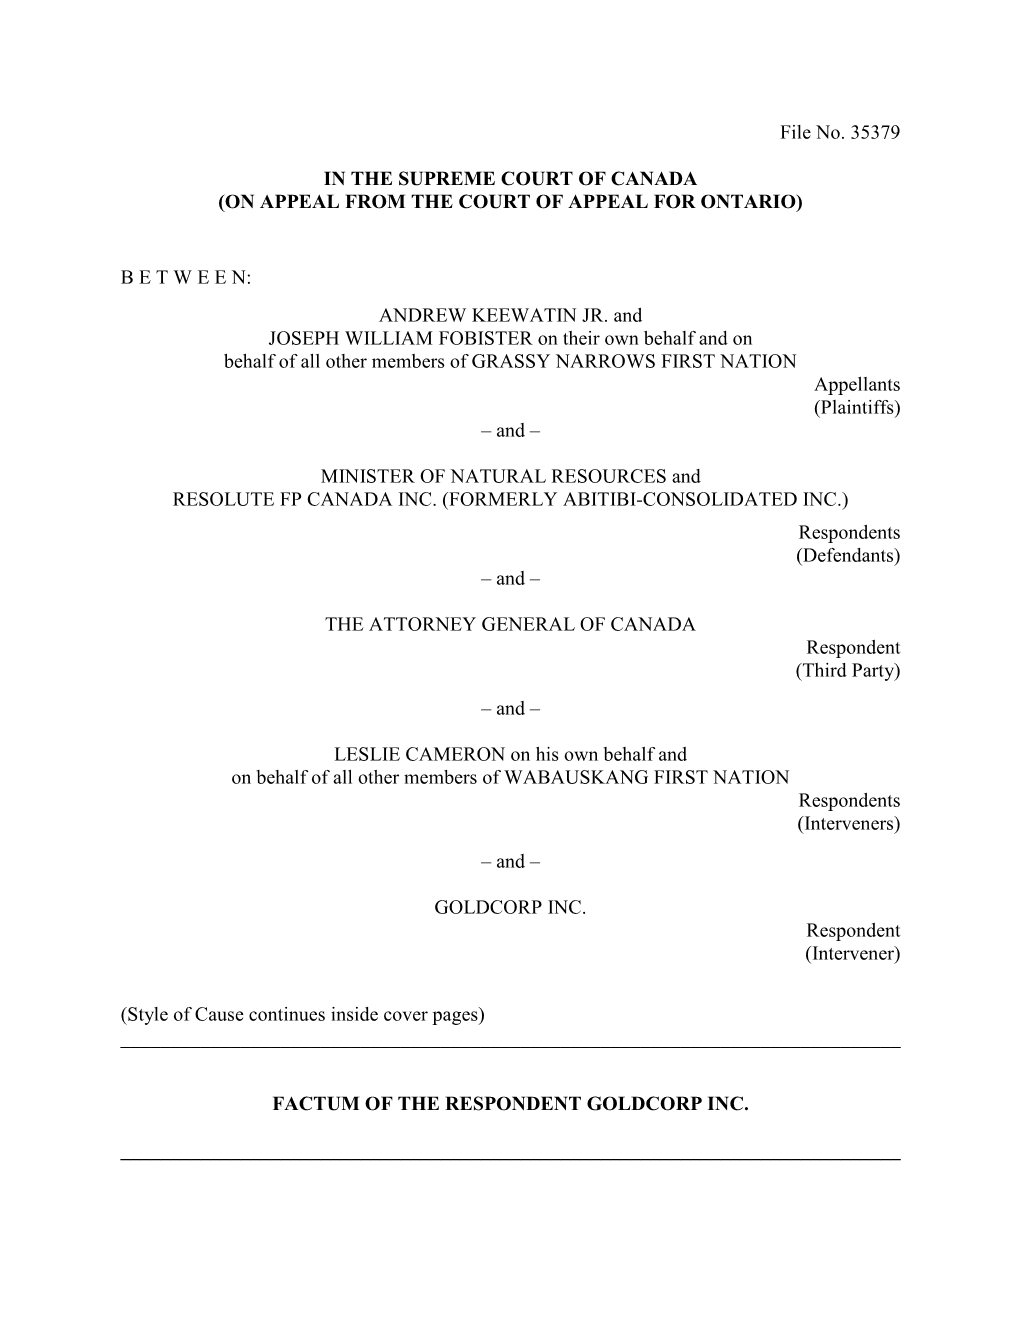 File No. 35379 in the SUPREME COURT of CANADA (ON APPEAL